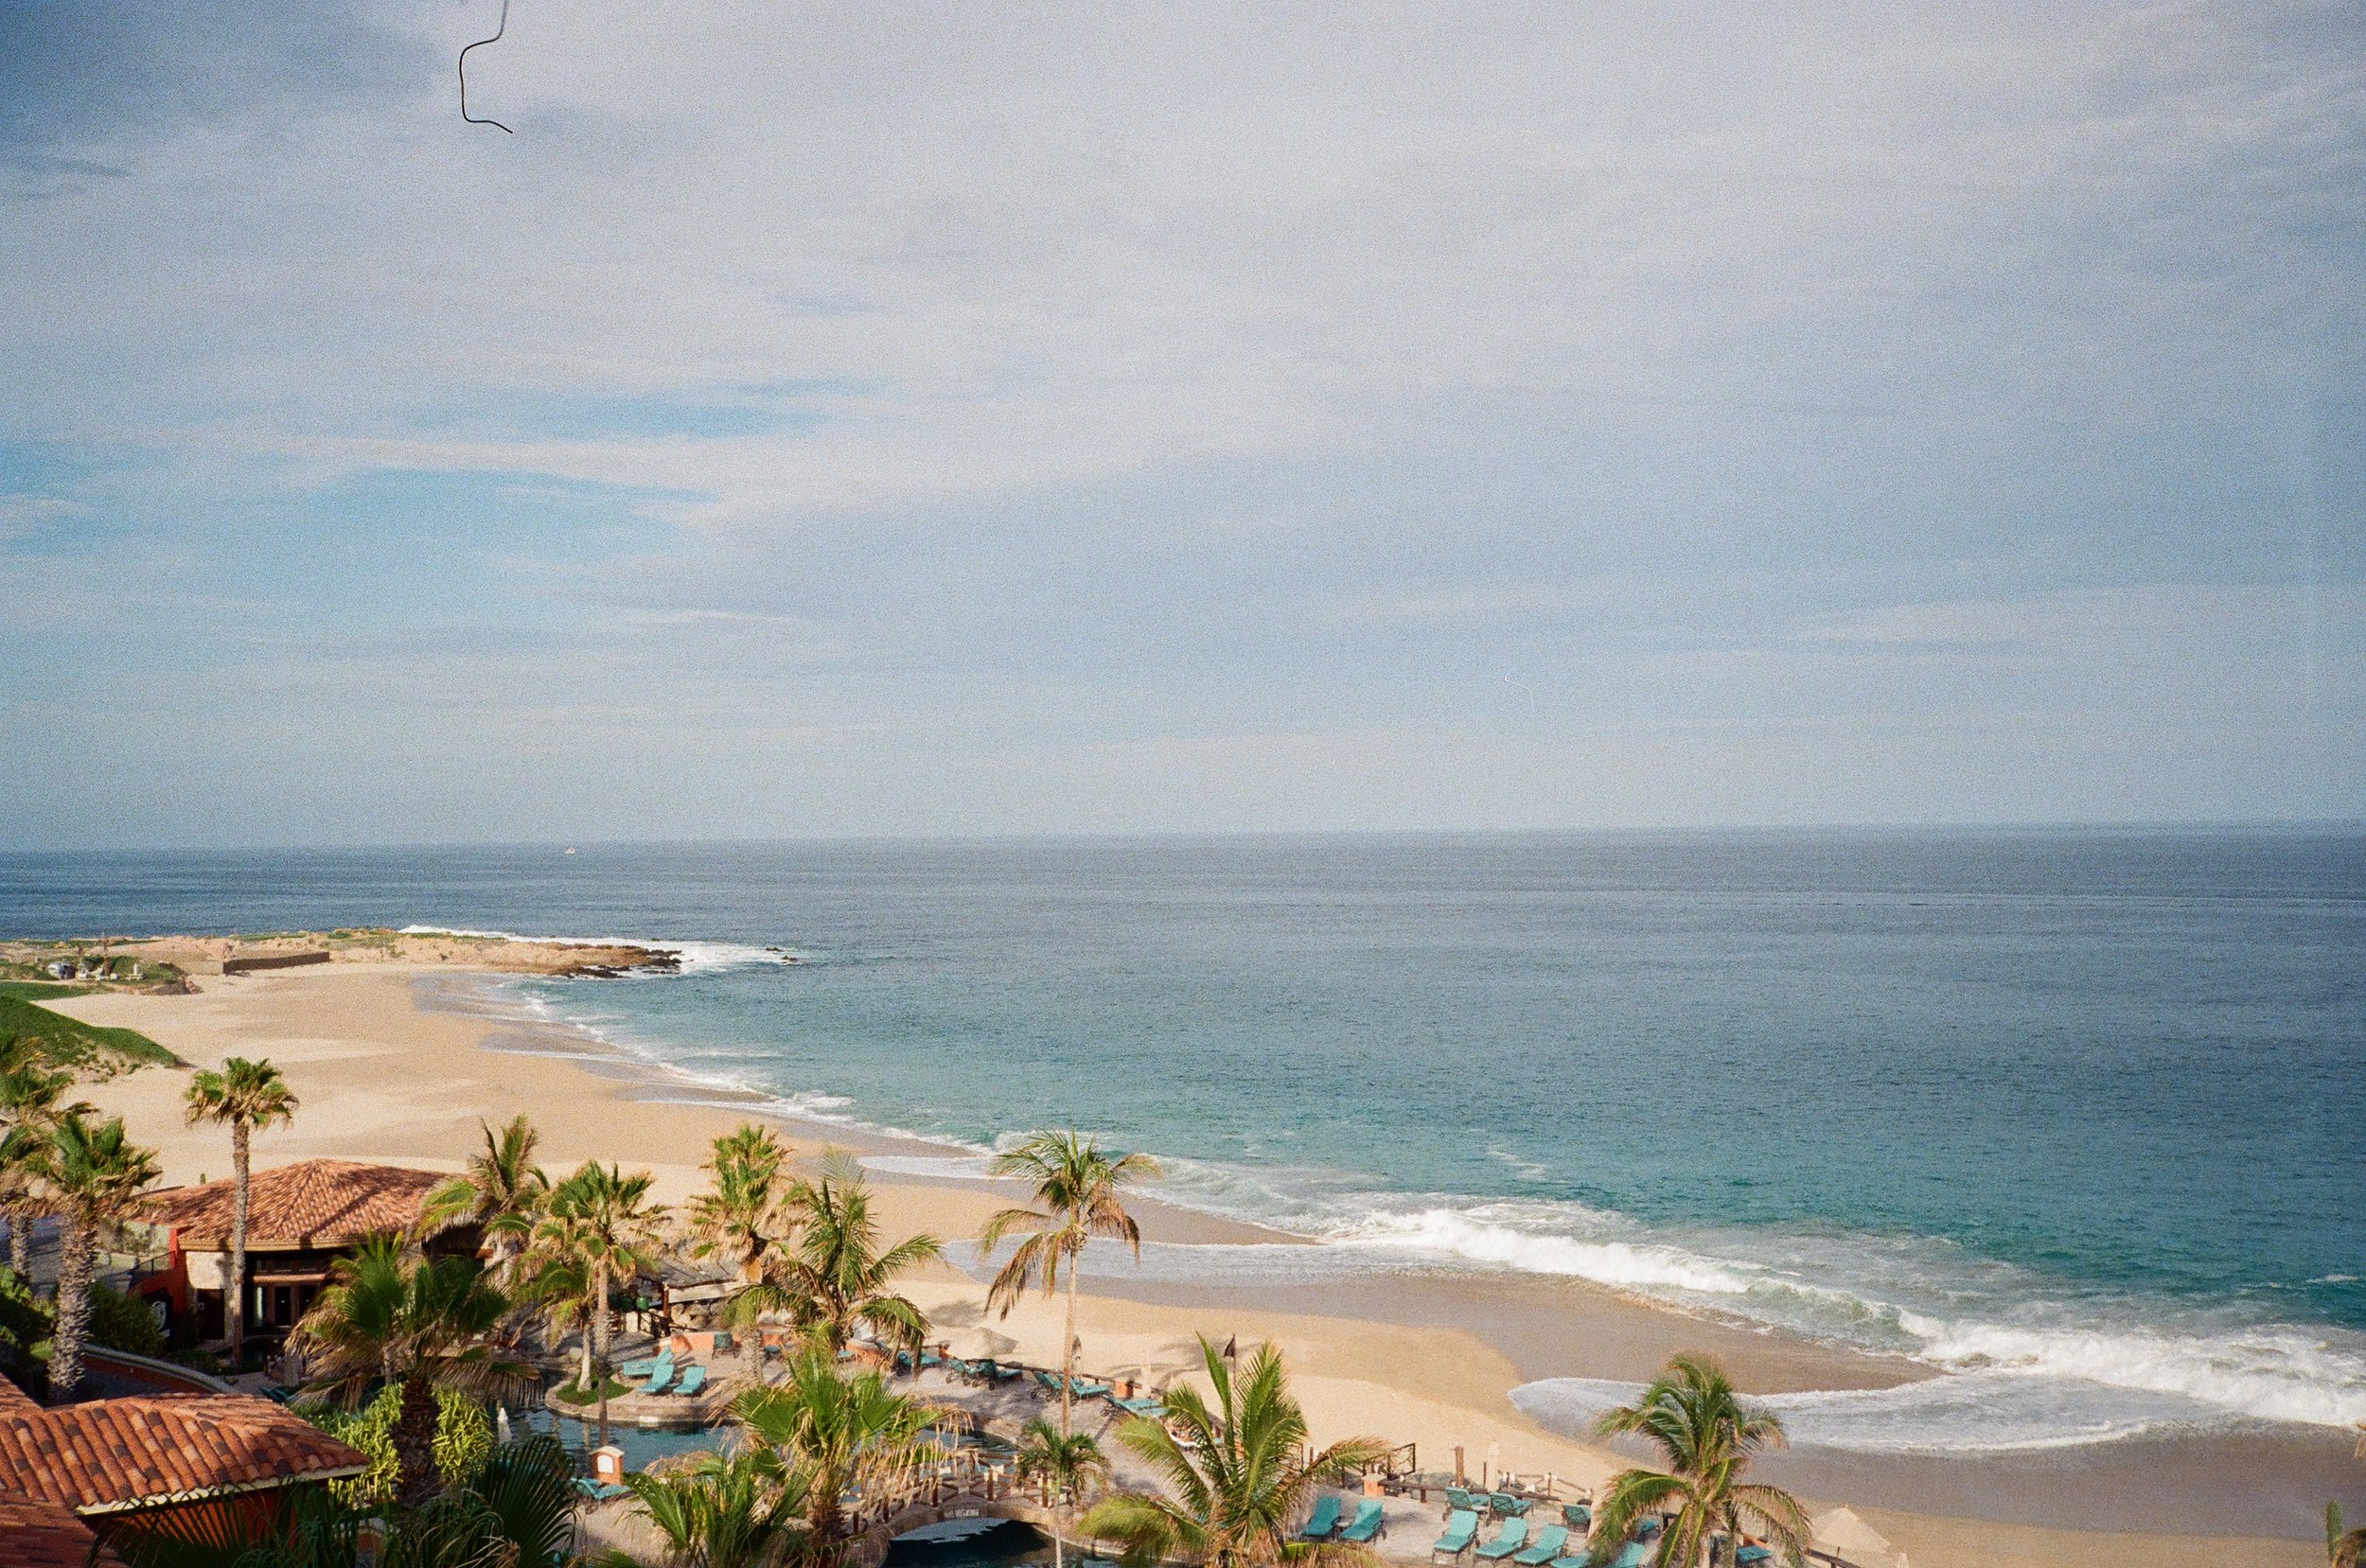 35mm point and shoot in Cabo